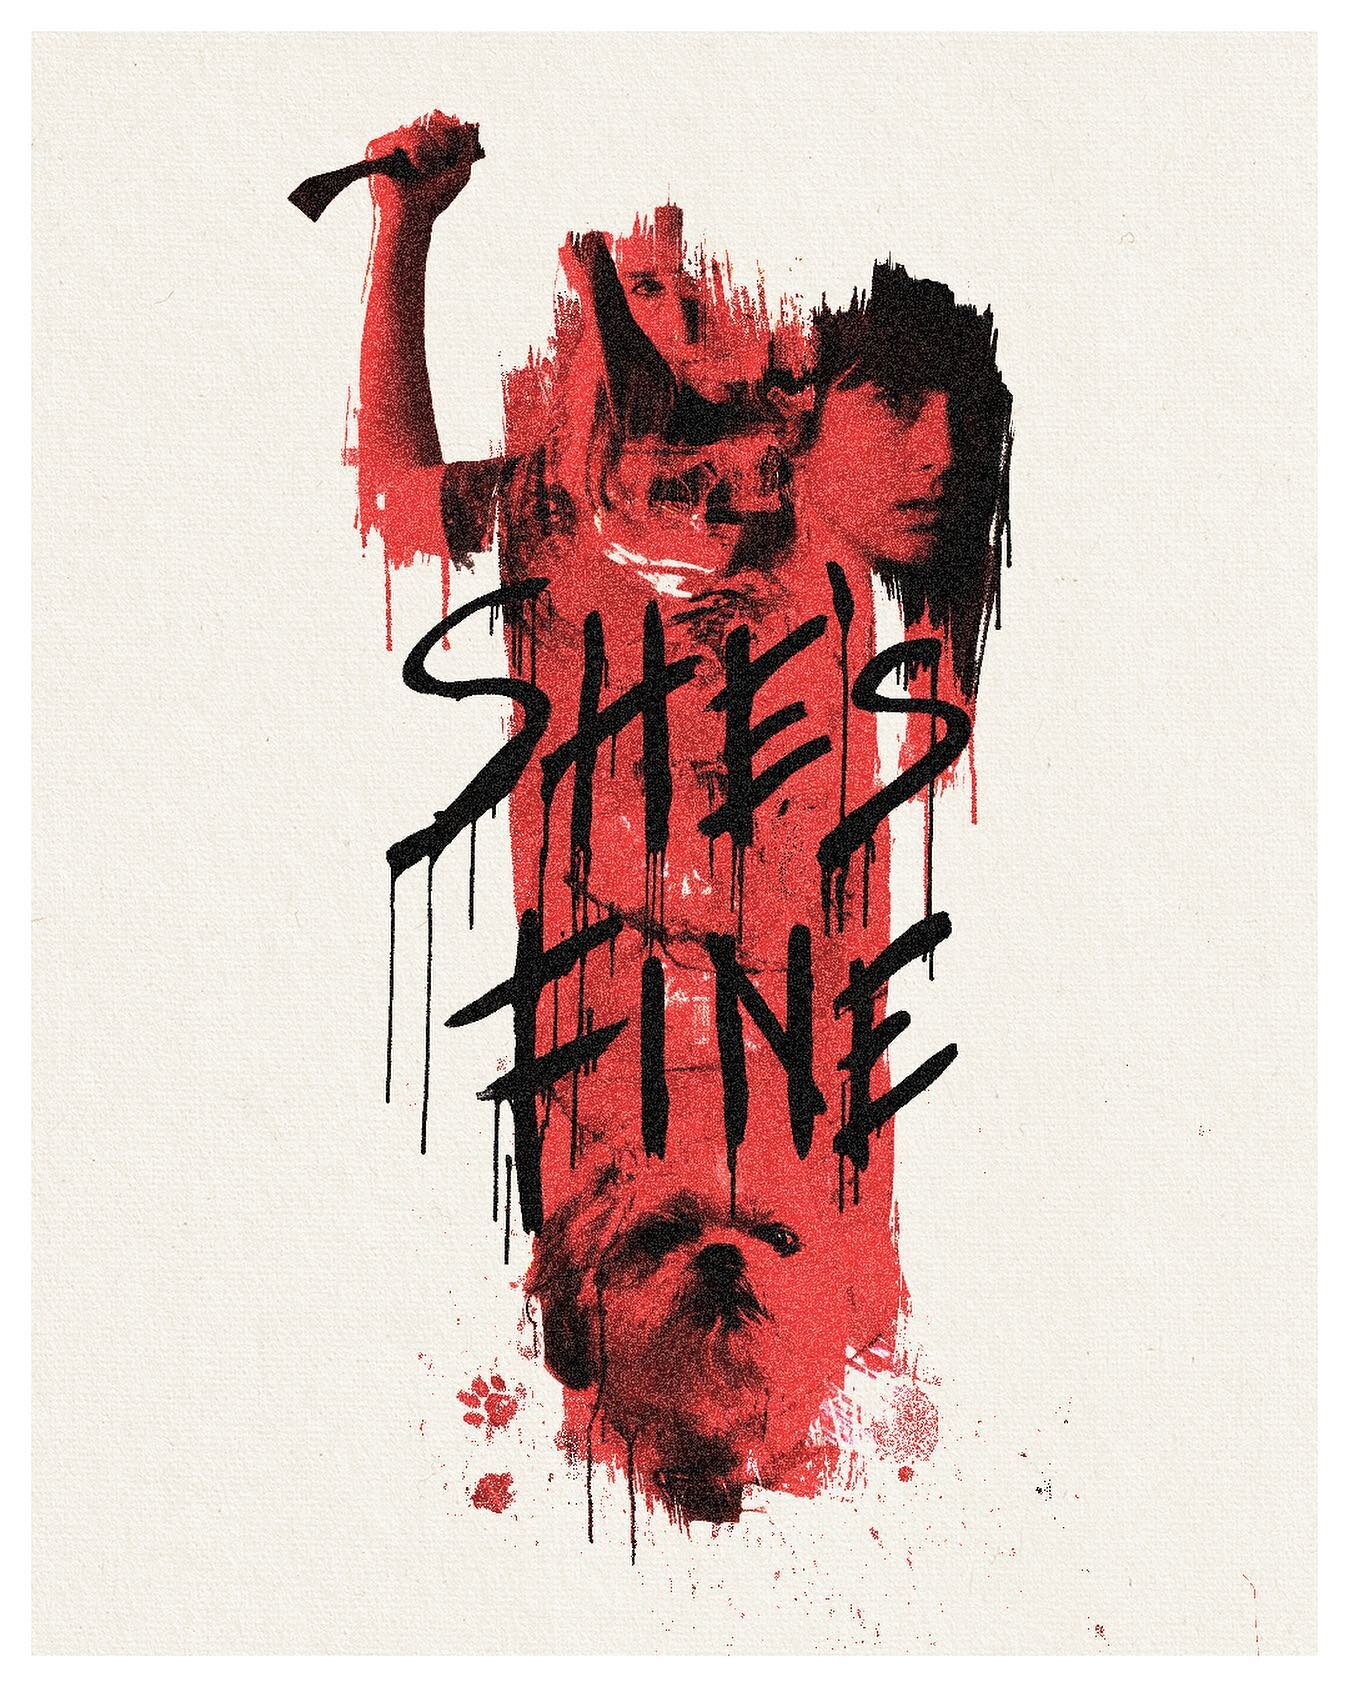 After nine months of working on this beautiful short film with an incredible team based in New York and Atlanta, I can proudly announce that my latest short film, &ldquo;She&rsquo;s Fine&rdquo;, is finished and ready to be seen by the world.

As we s